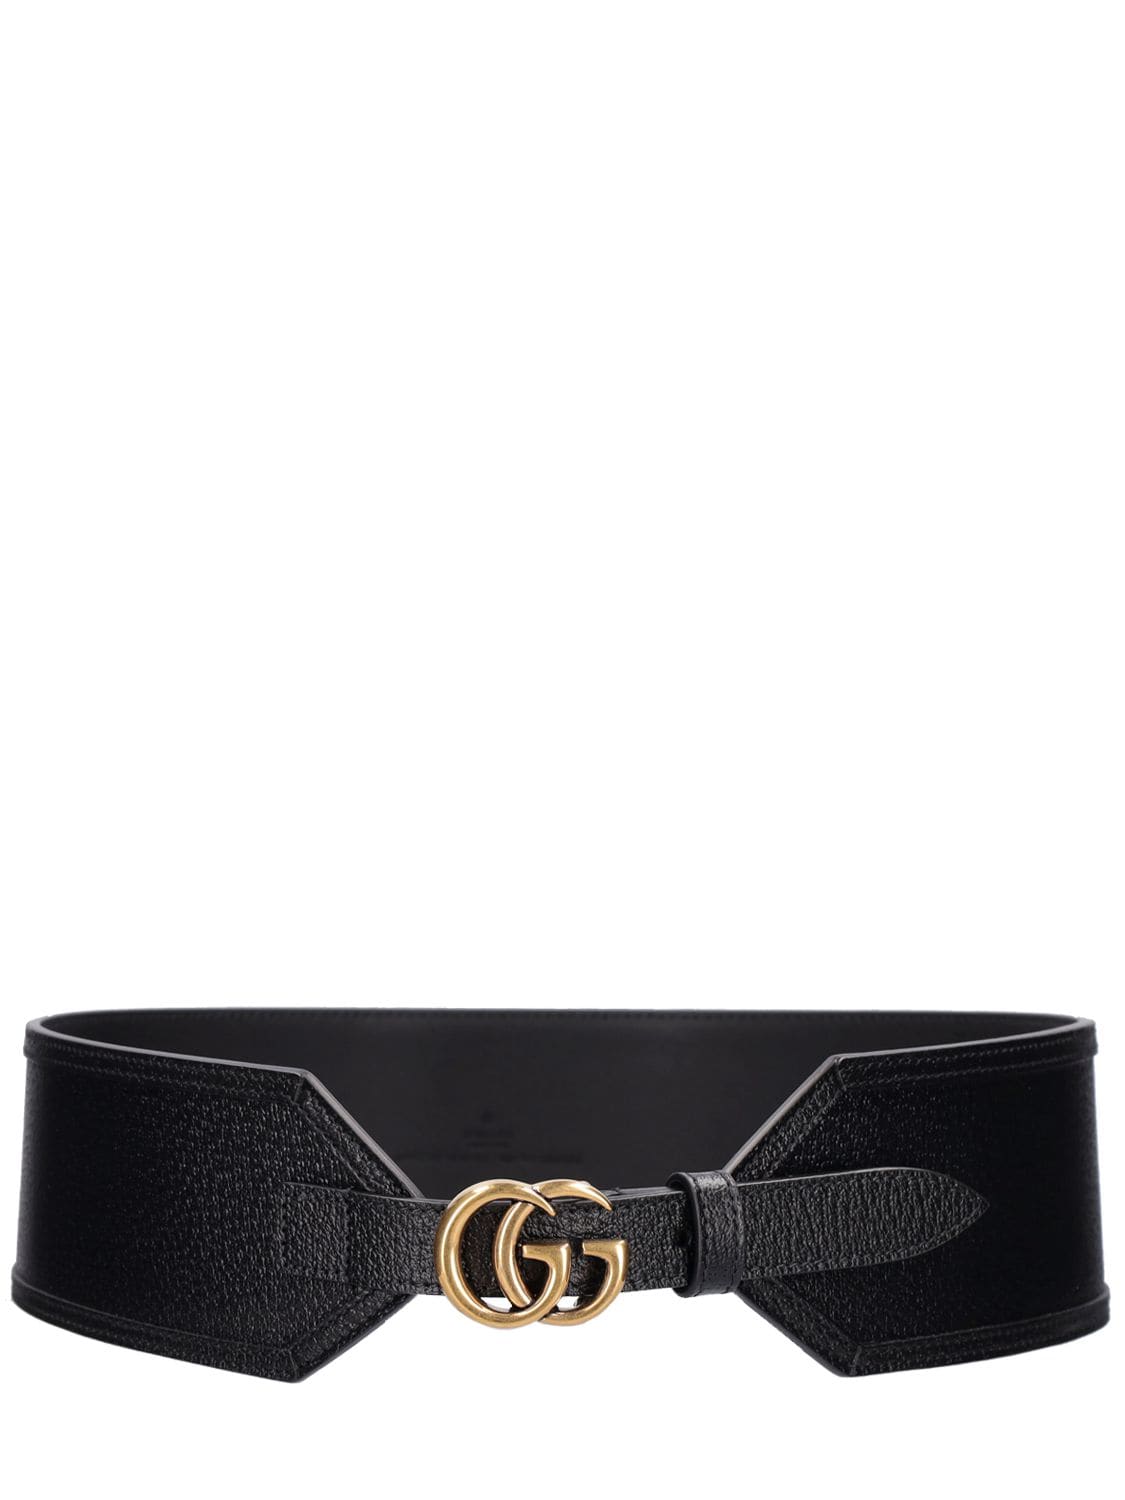 Gucci Gg Marmont Wide Belt In Black